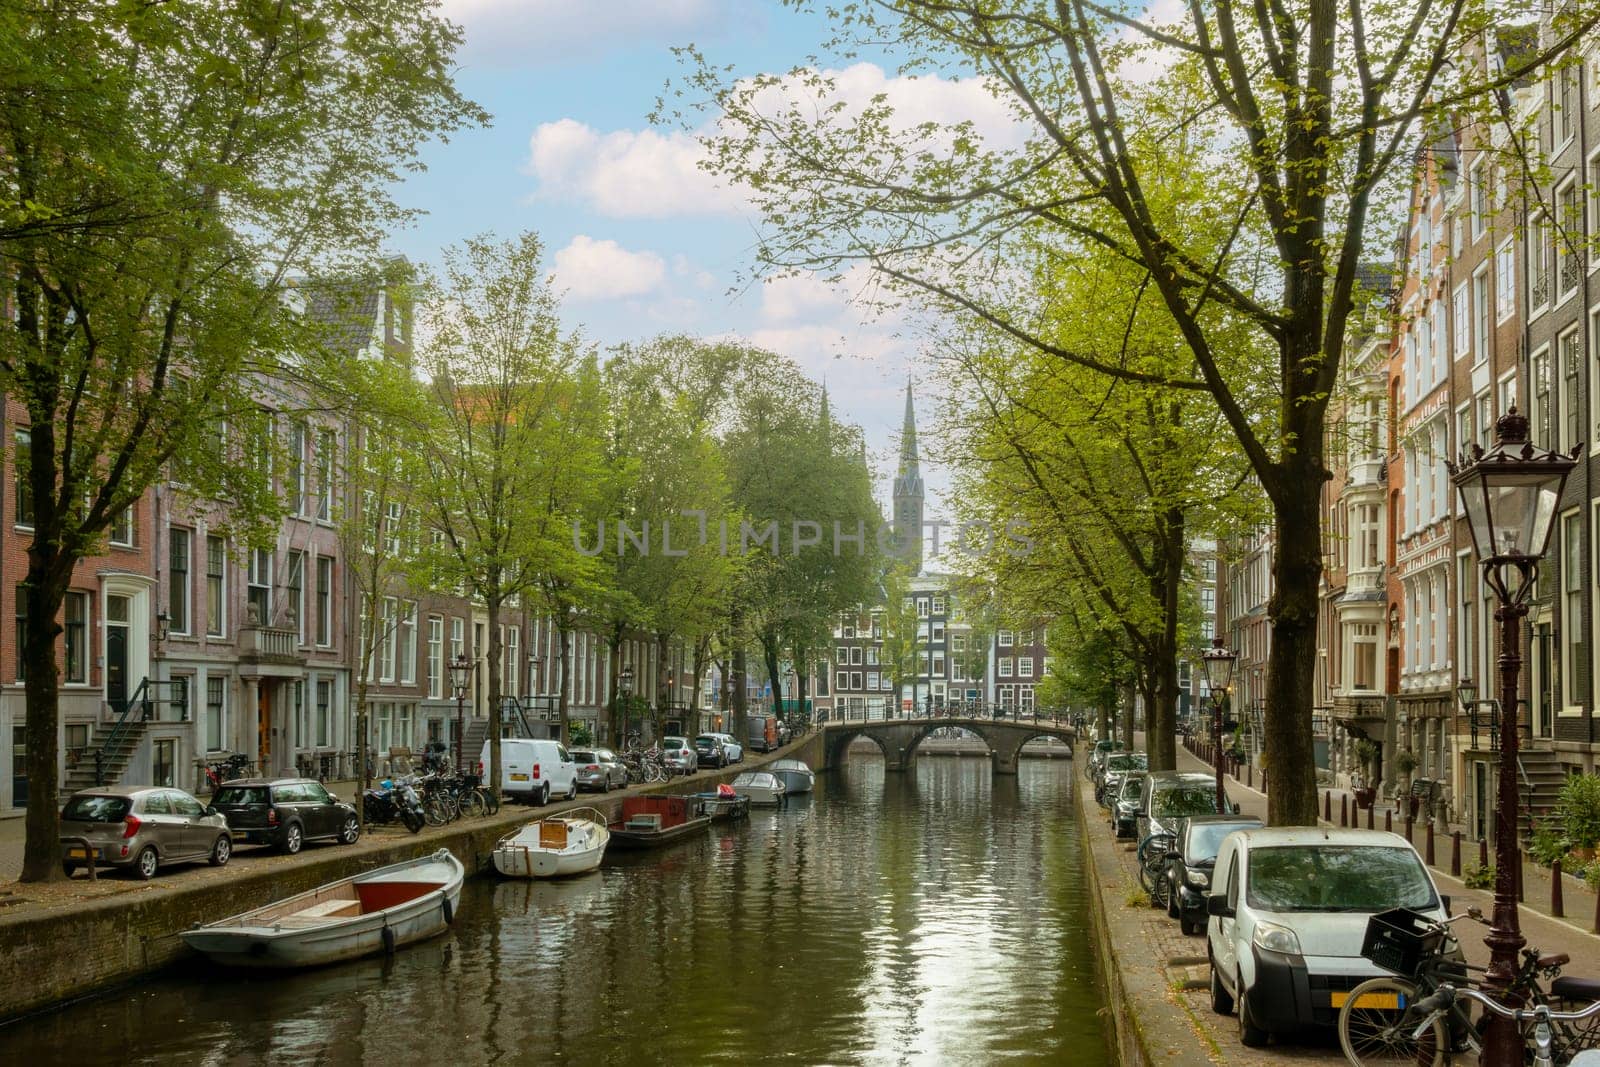 Netherlands. Summer day on a canal in the center of Amsterdam. Lots of boats and cars parked on the embankments